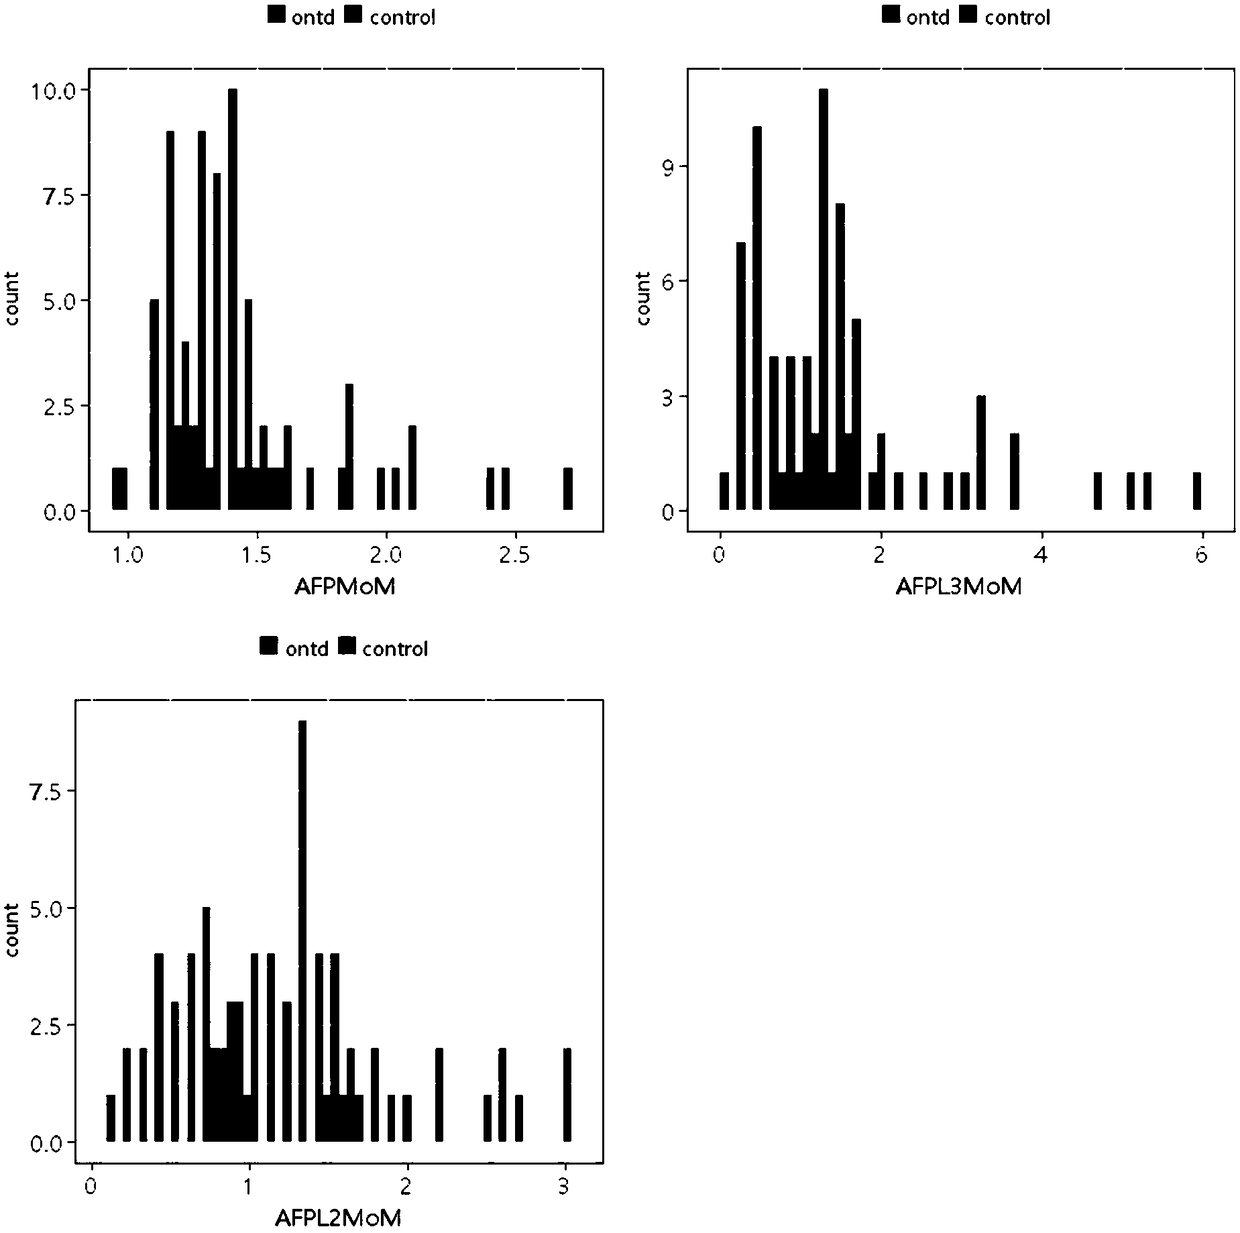 Method for screening open neural tube defects through maternal serum alpha-fetoprotein heteroplasmons L2 and L3 in second trimester